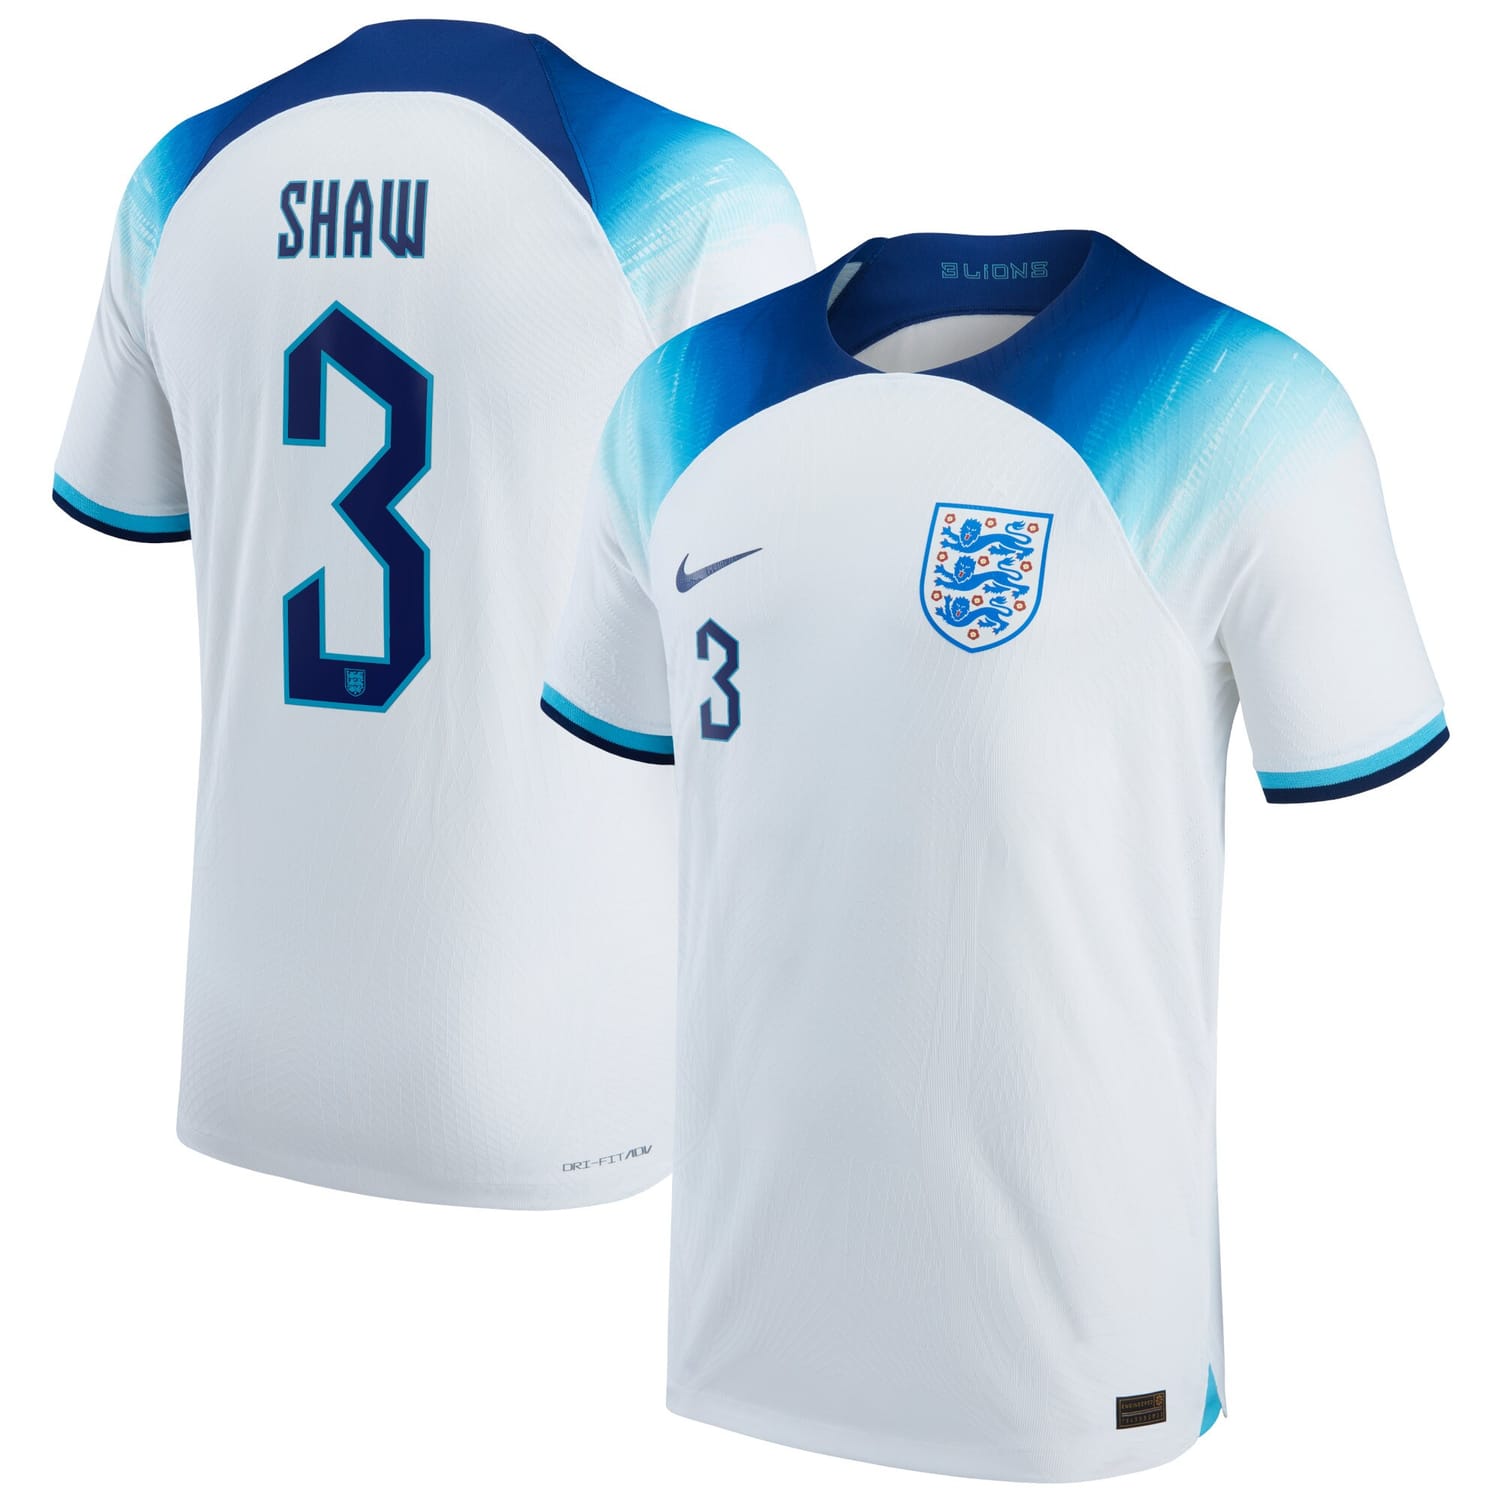 England National Team Home Authentic Jersey Shirt 2022 player Luke Shaw 3 printing for Men